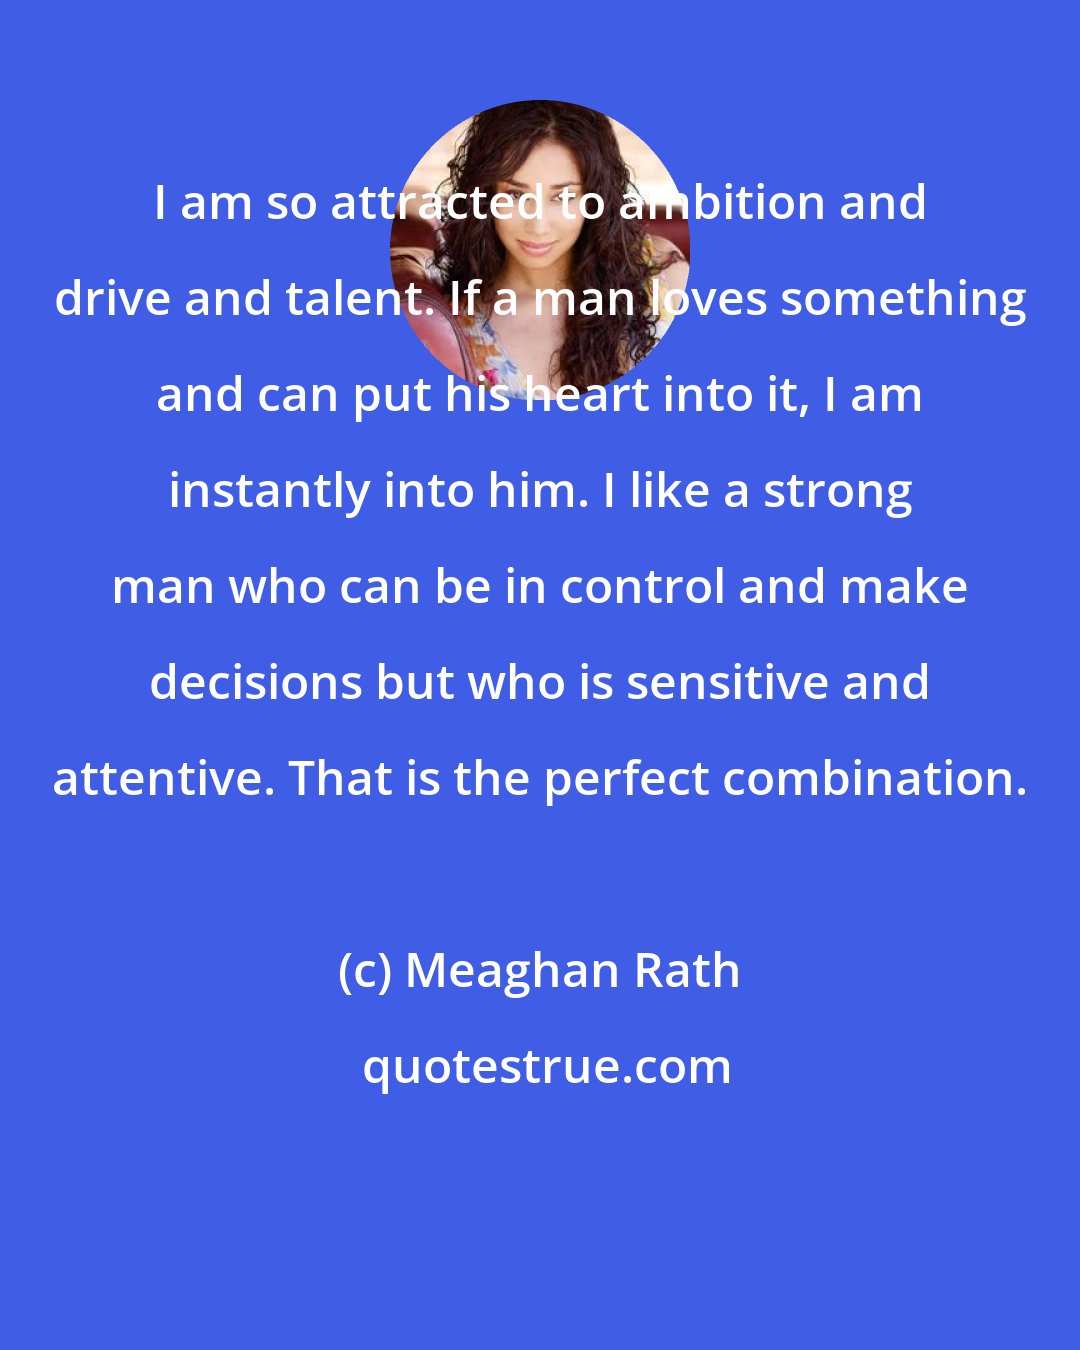 Meaghan Rath: I am so attracted to ambition and drive and talent. If a man loves something and can put his heart into it, I am instantly into him. I like a strong man who can be in control and make decisions but who is sensitive and attentive. That is the perfect combination.